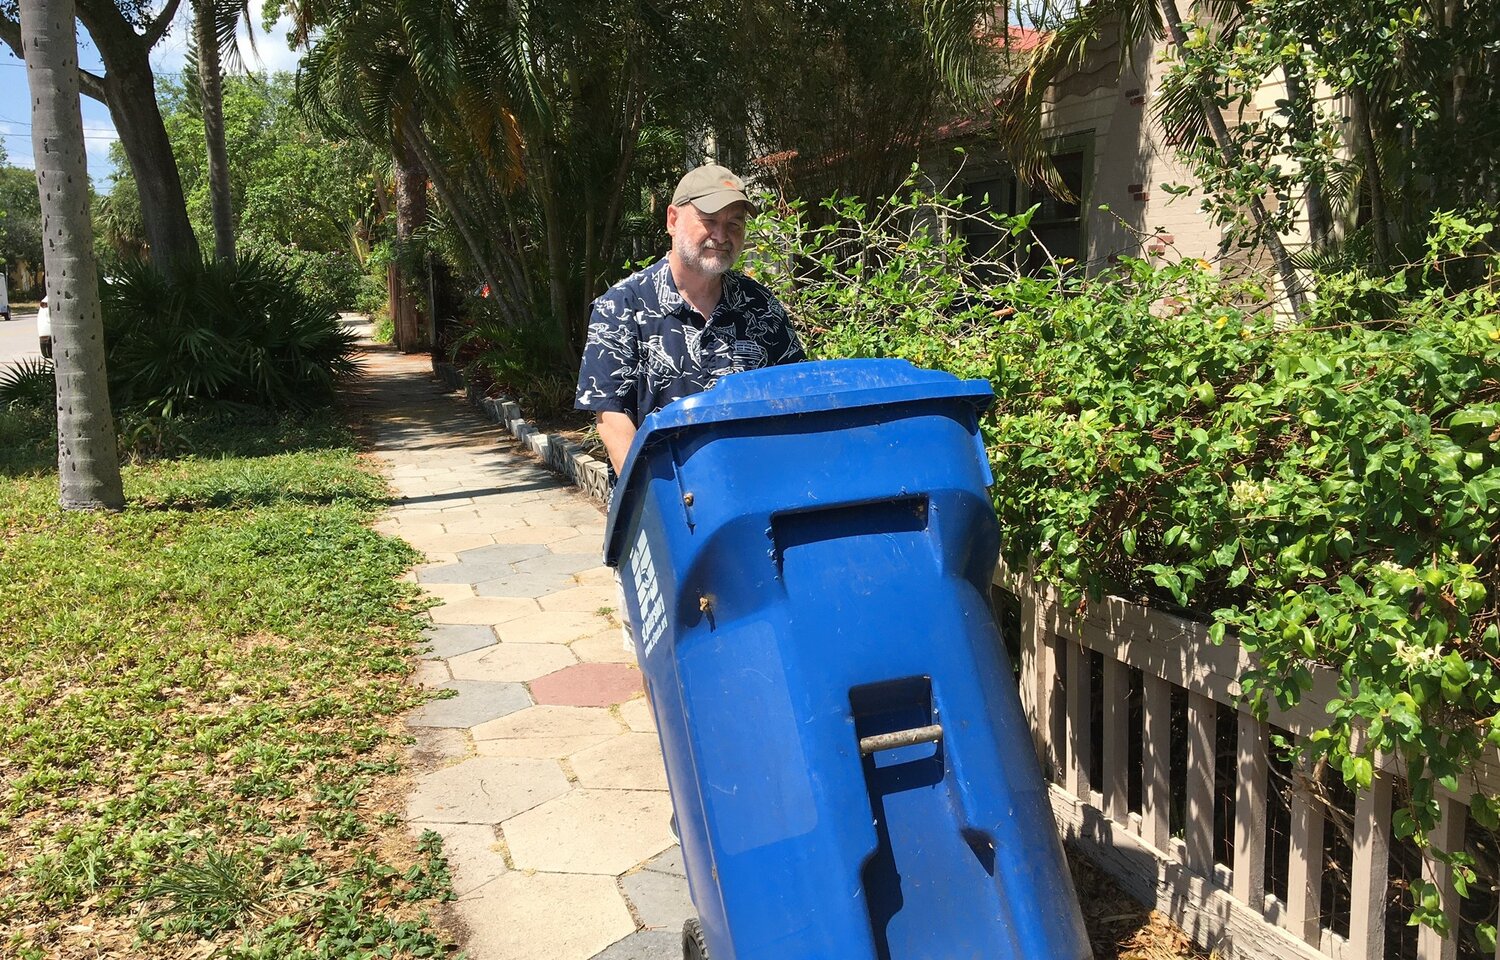 Columnist Craig Pittman does the two-step with his recycling bin.